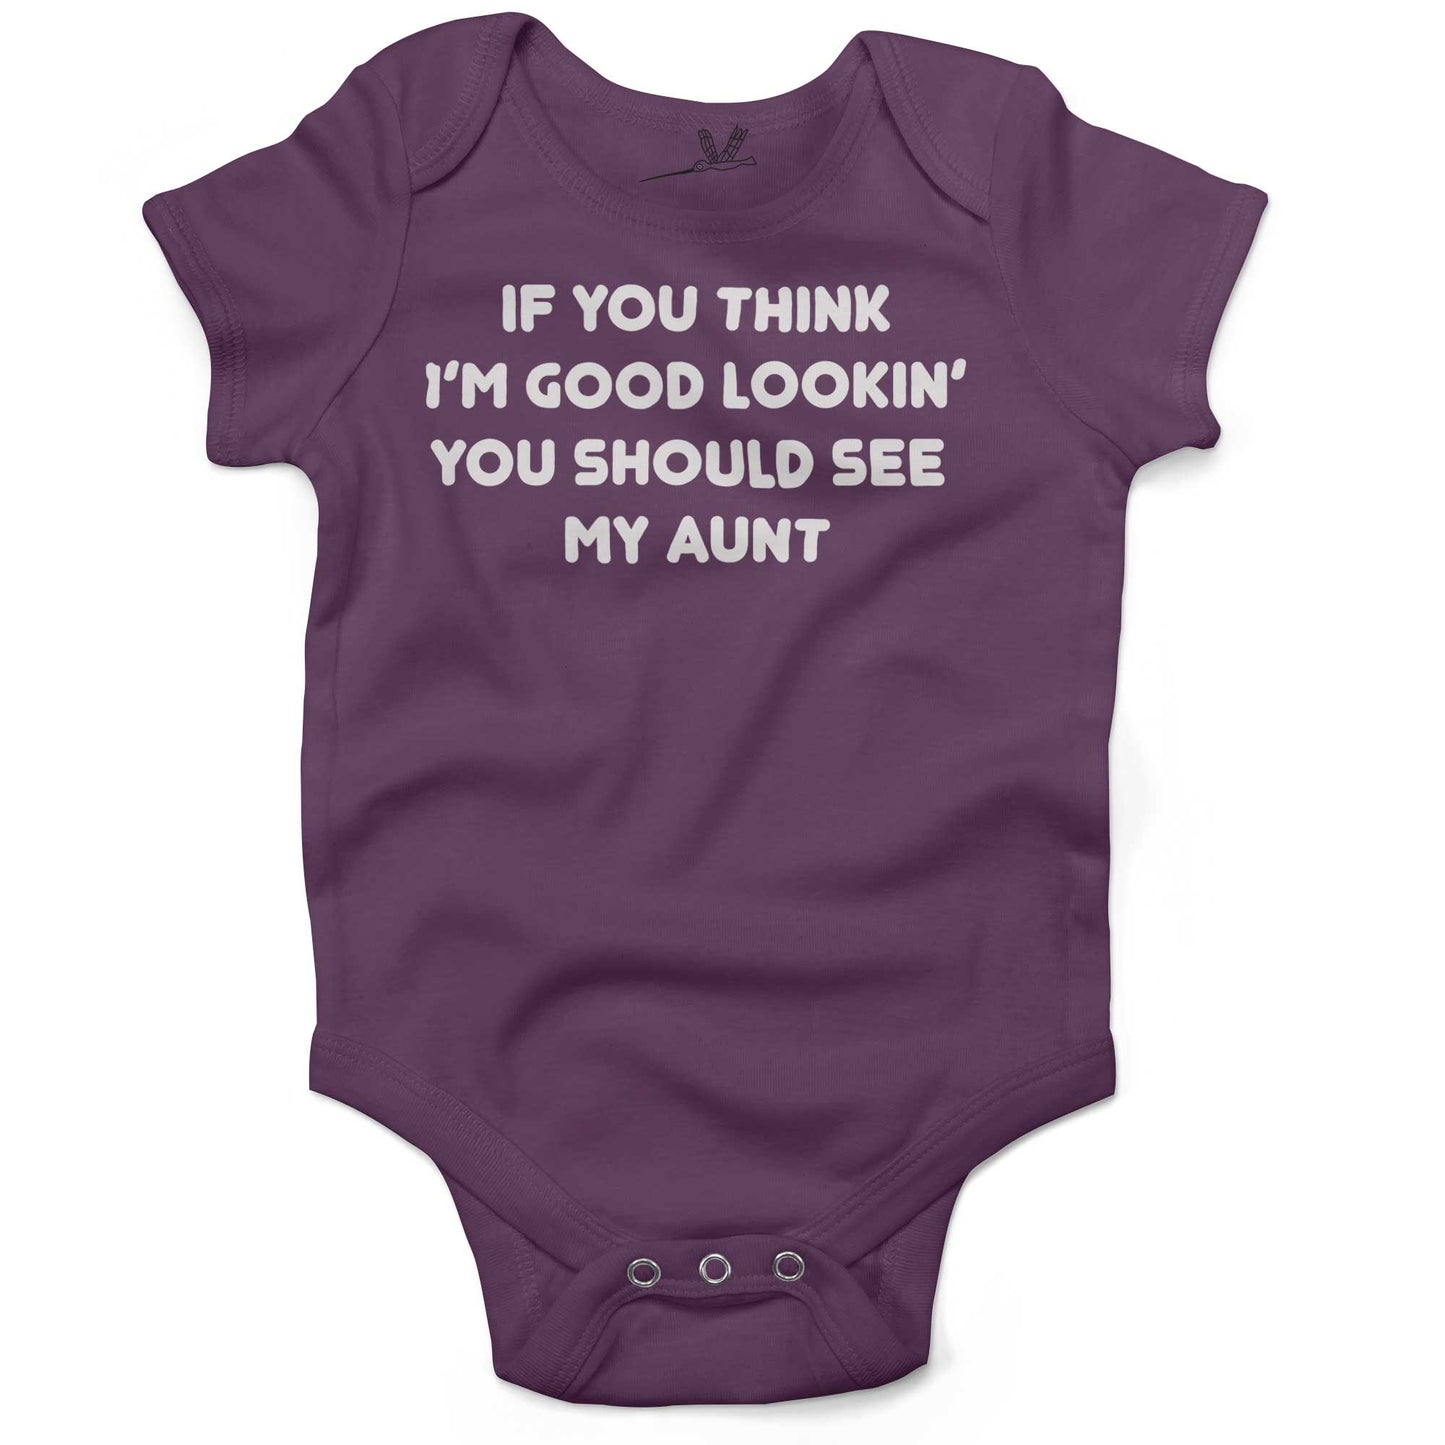 If You Think I'm Good Lookin' You Should See My Aunt Infant Bodysuit or Raglan Tee-Organic Purple-3-6 months